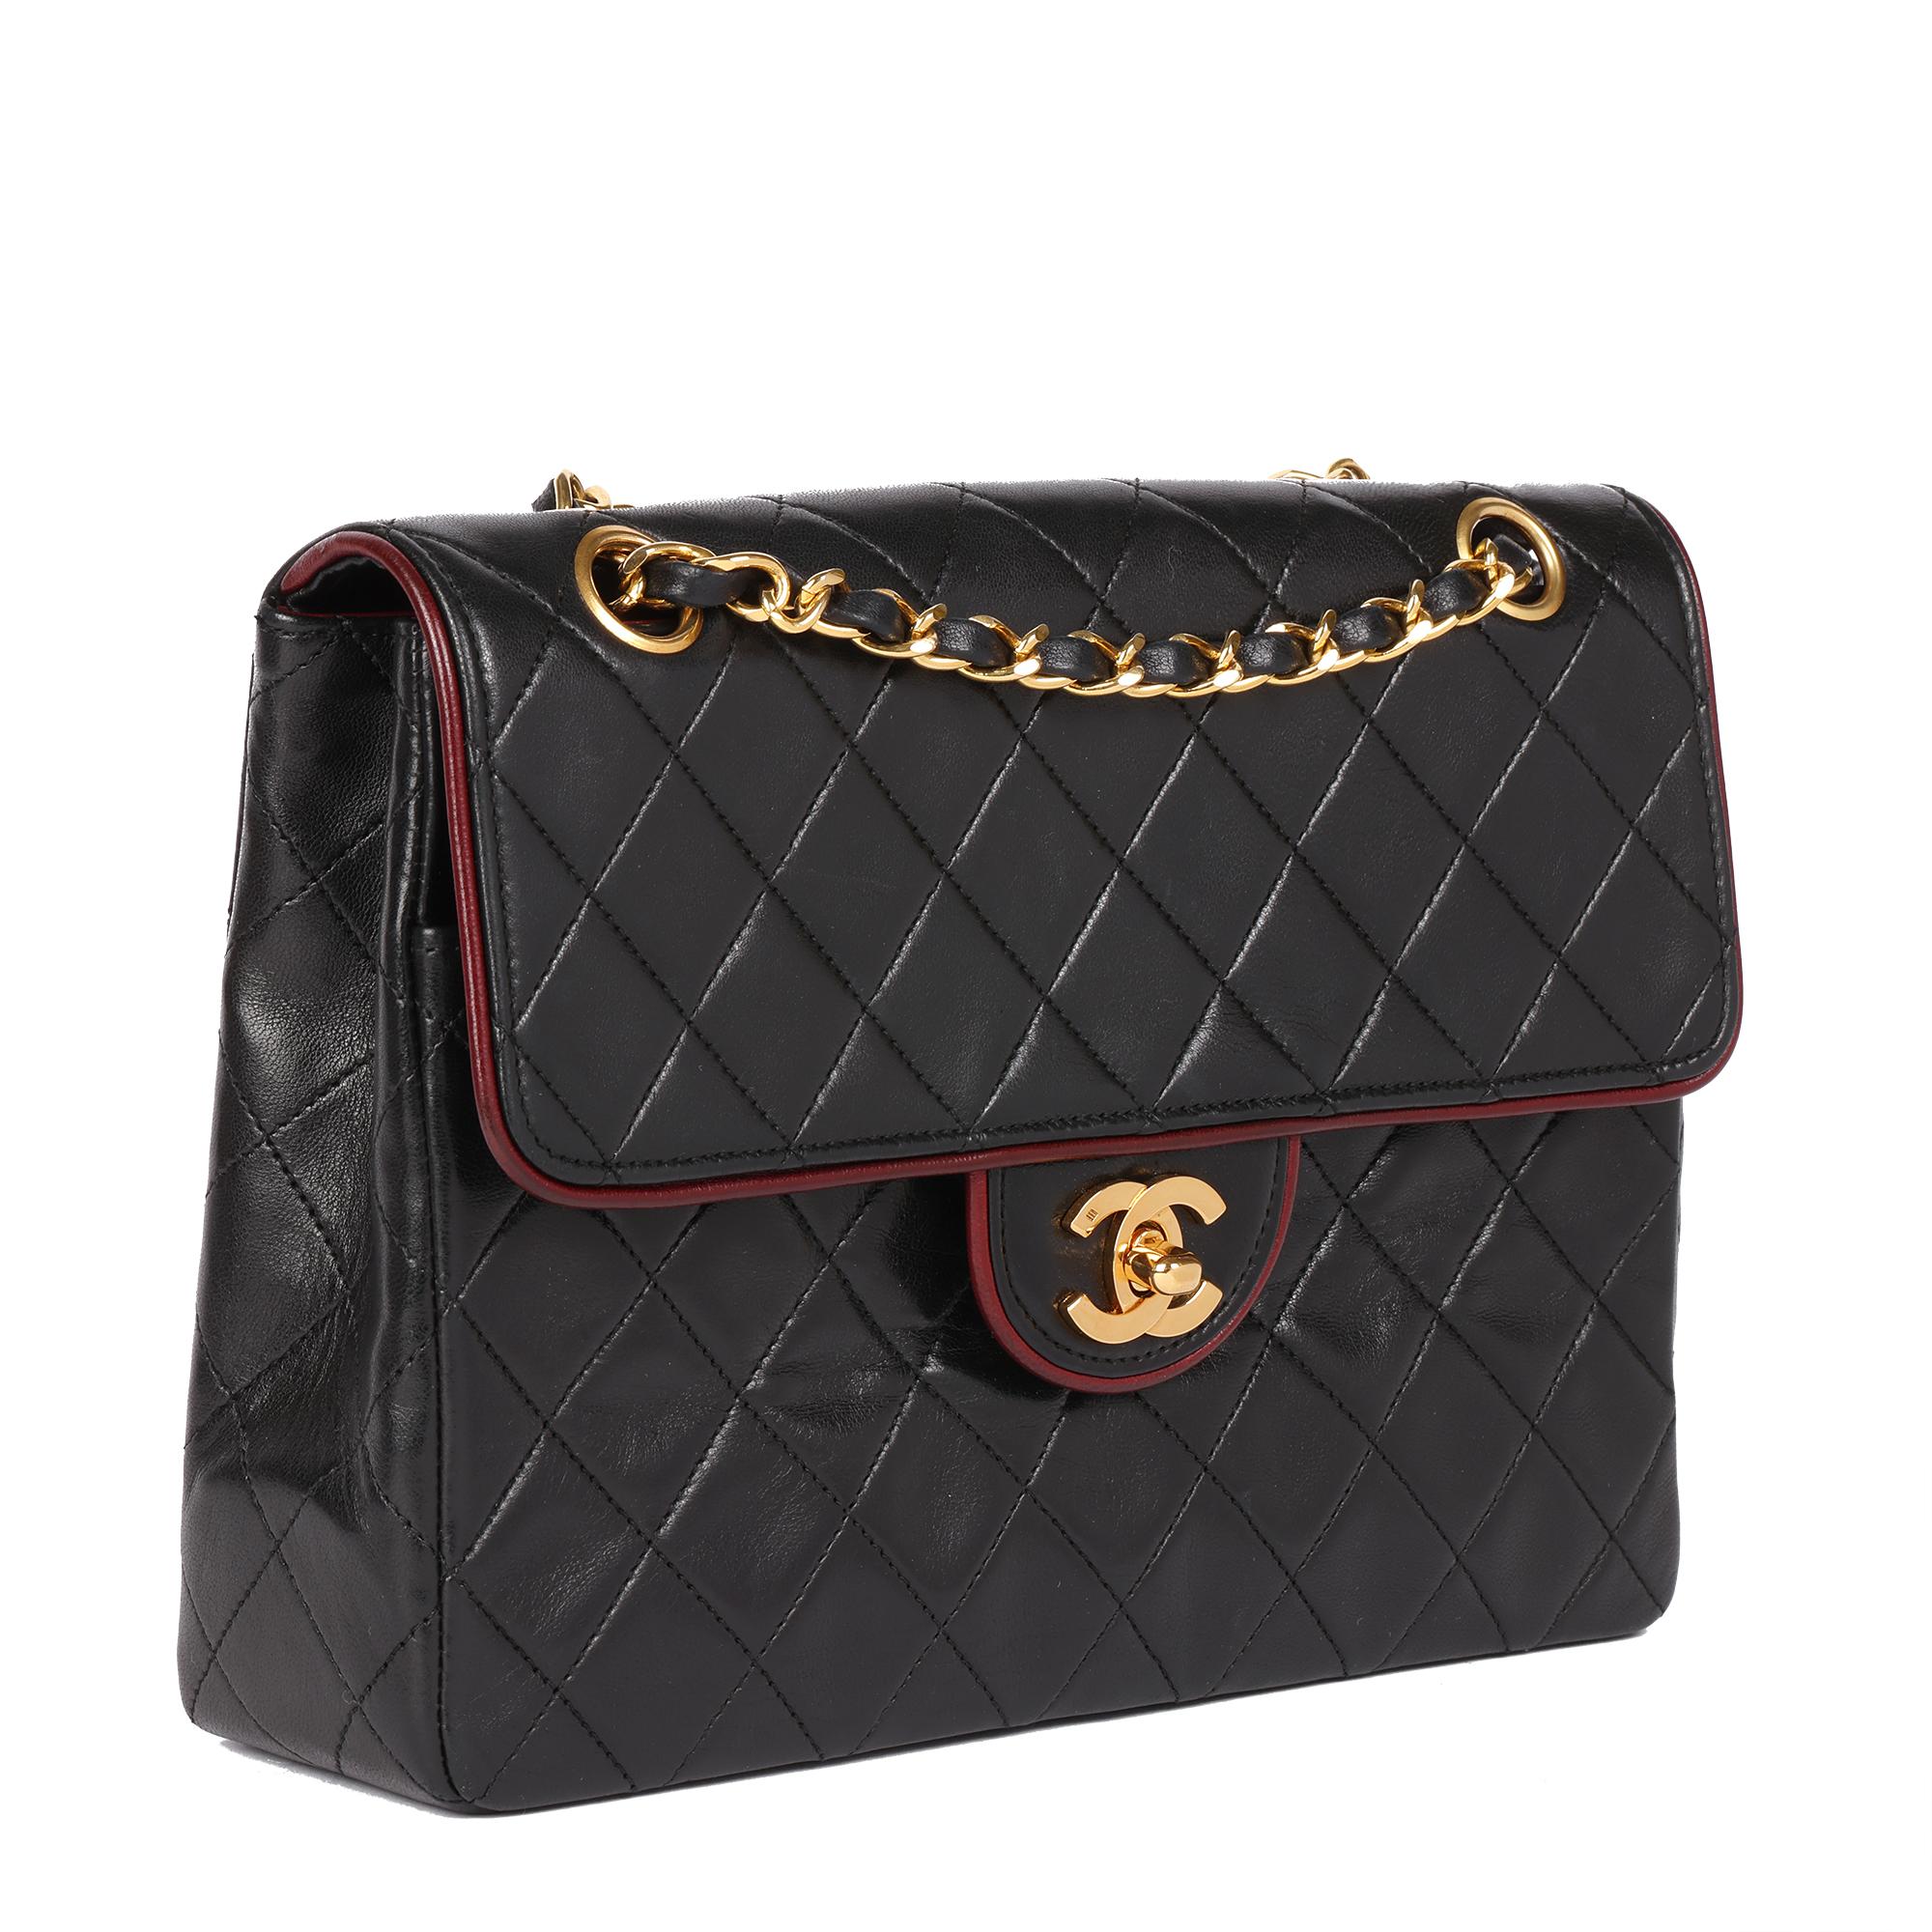 CHANEL
Black Quilted Lambskin Vintage Medium Classic Single Flap Bag with Red Trim

Serial Number: 1354574
Age (Circa): 1990
Accompanied By: Chanel Dust Bag, Authenticity Card 
Authenticity Details: Authenticity Card, Serial Sticker (Made in